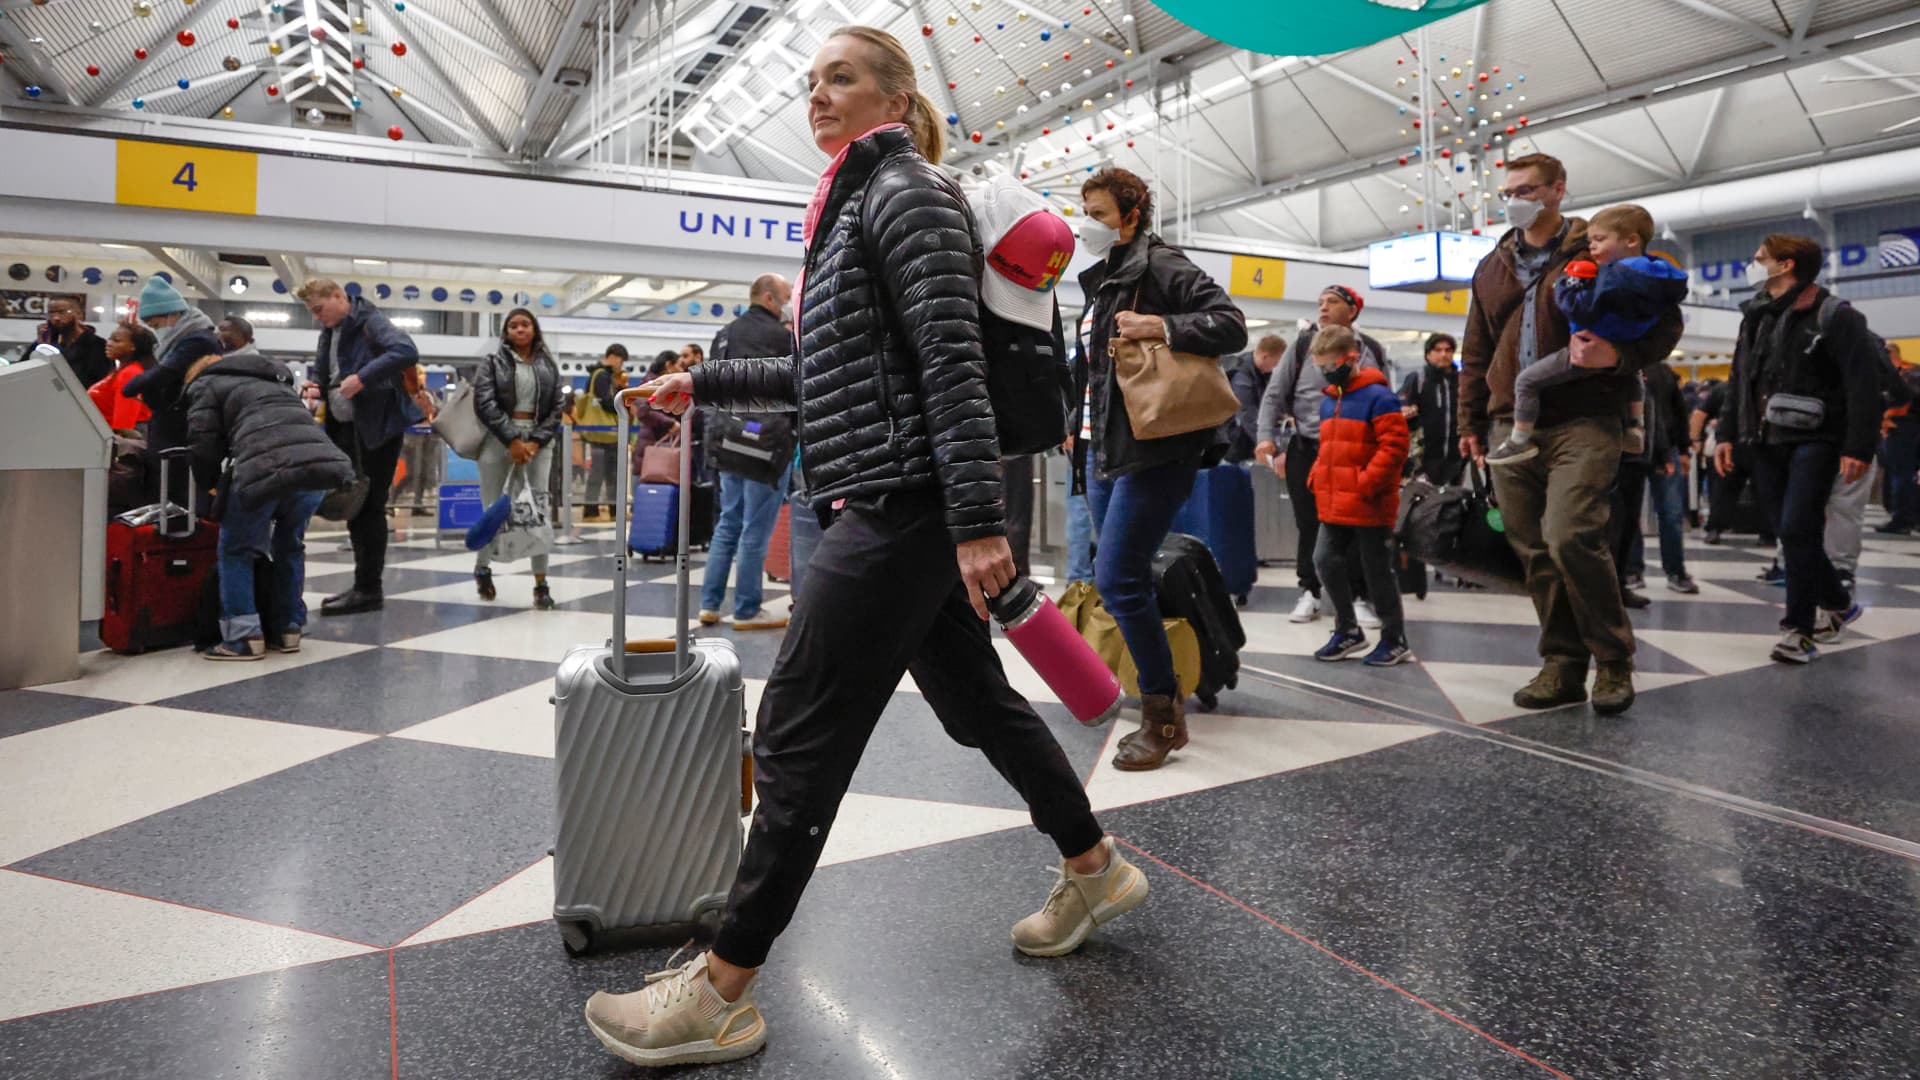 Travelers arrive for their flights at United Airlines Terminal 1 ahead of the Christmas Holiday at O'Hare International Airport on December 22, 2022, in Chicago.